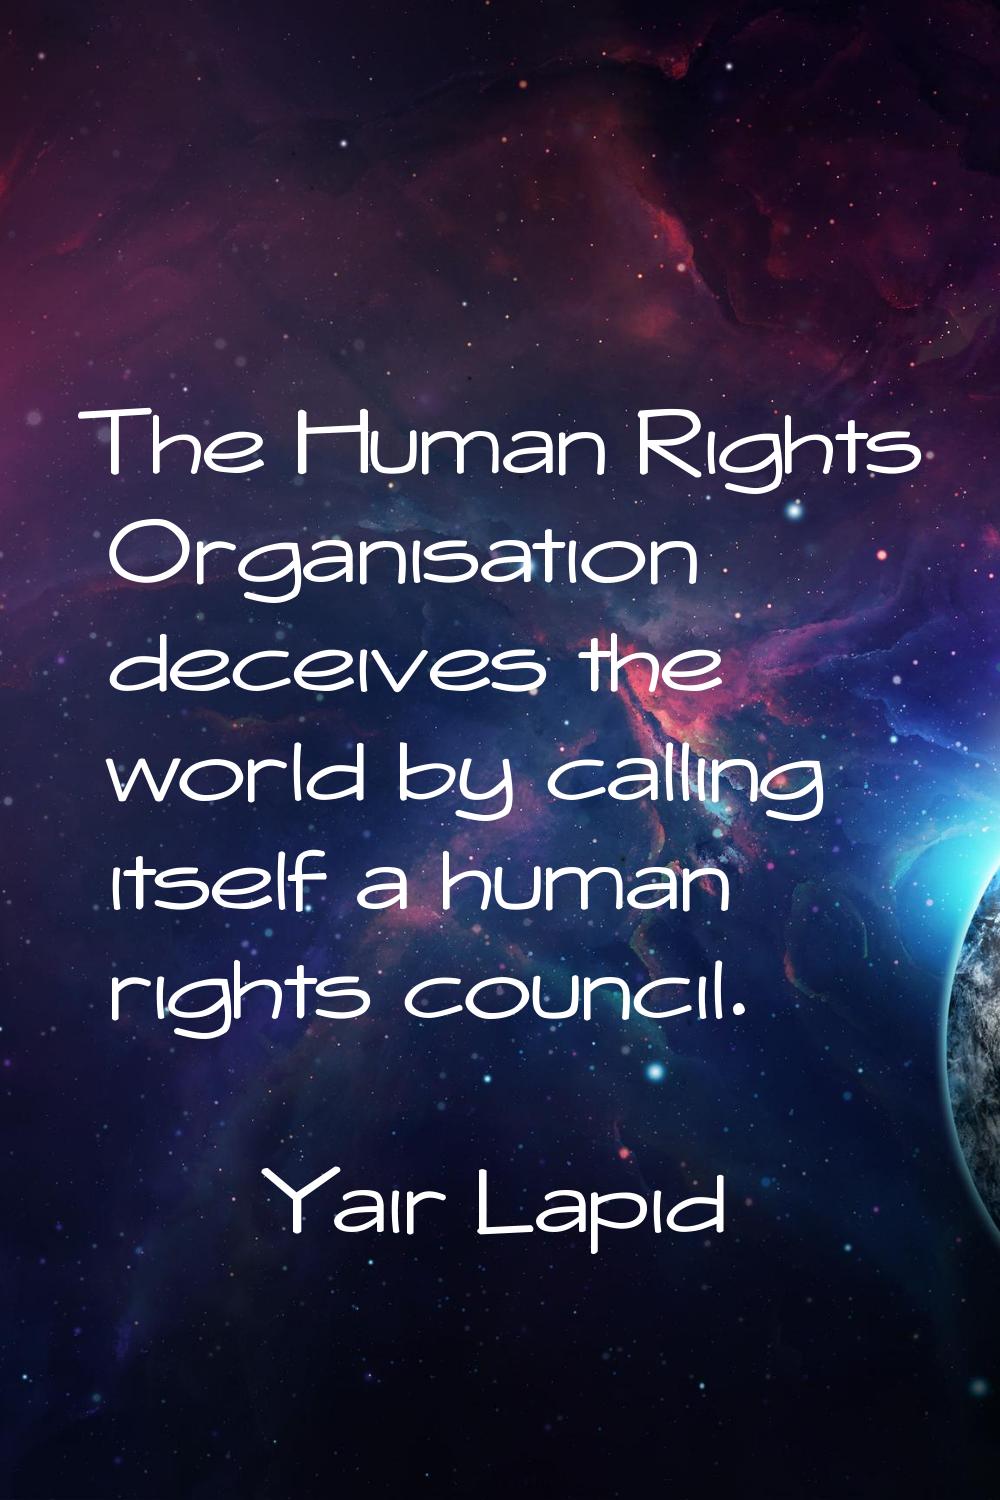 The Human Rights Organisation deceives the world by calling itself a human rights council.